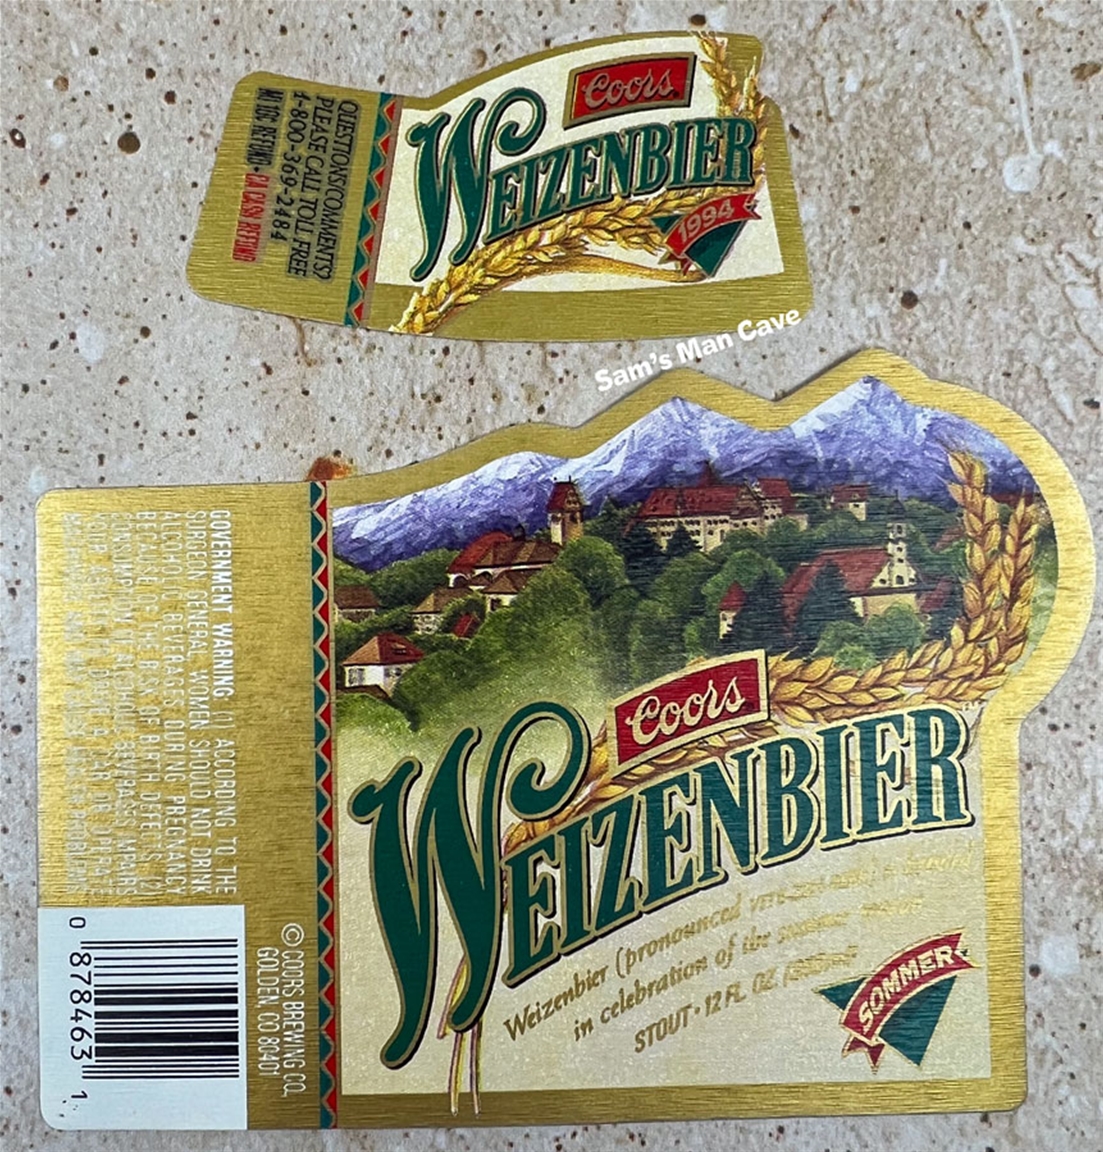 Coors Weizenbier Label with neck